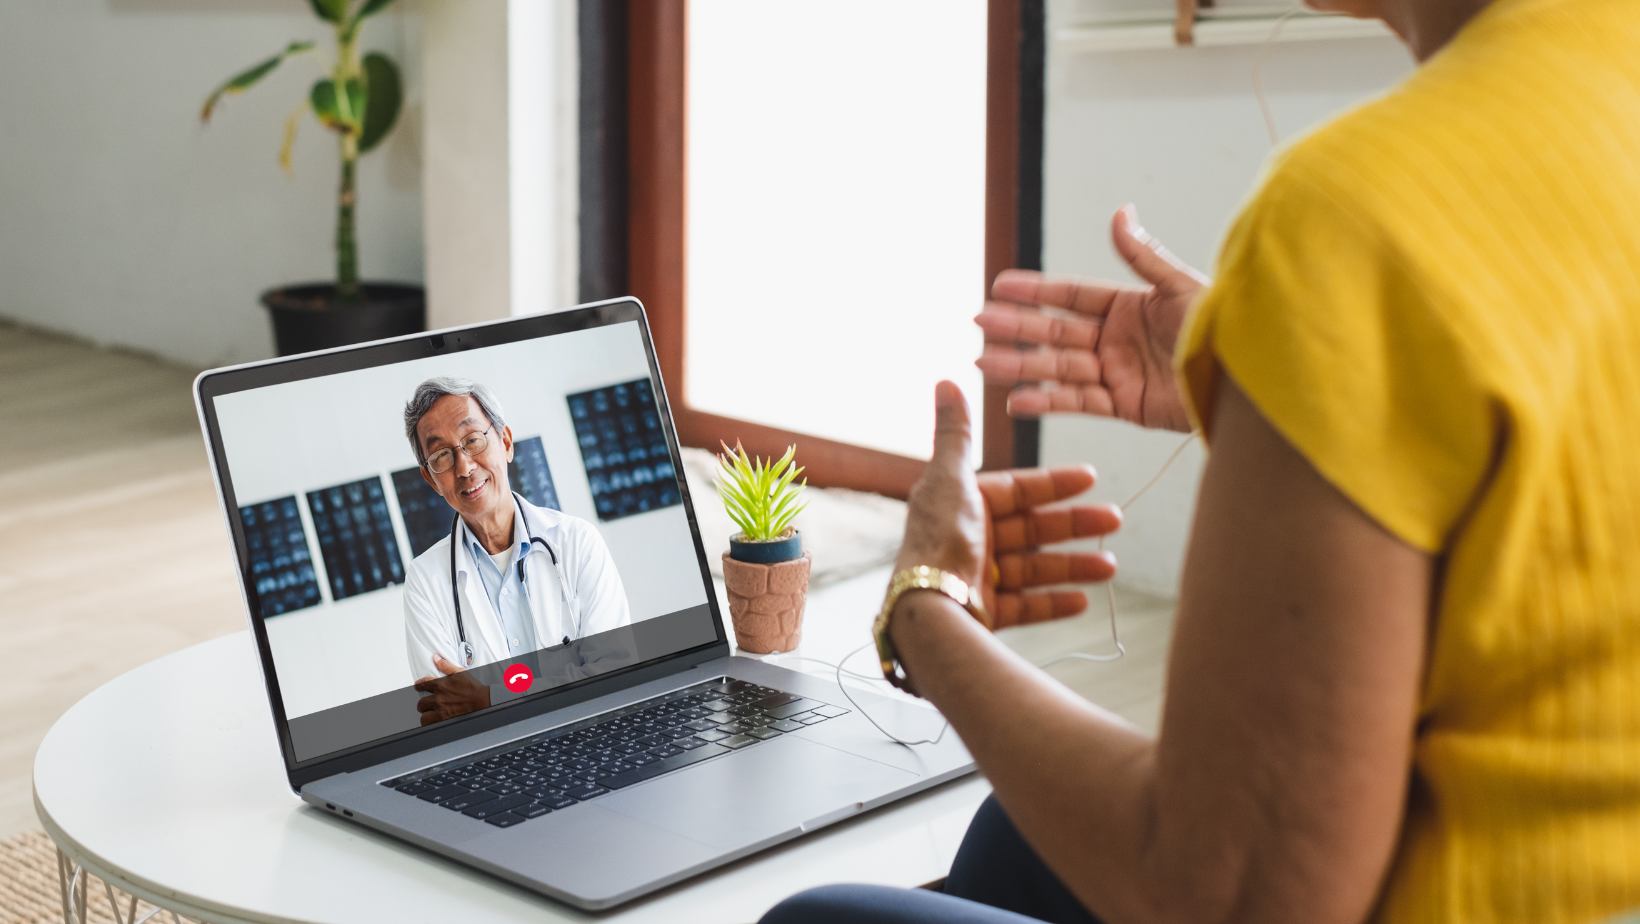 Patient on video call with doctor.